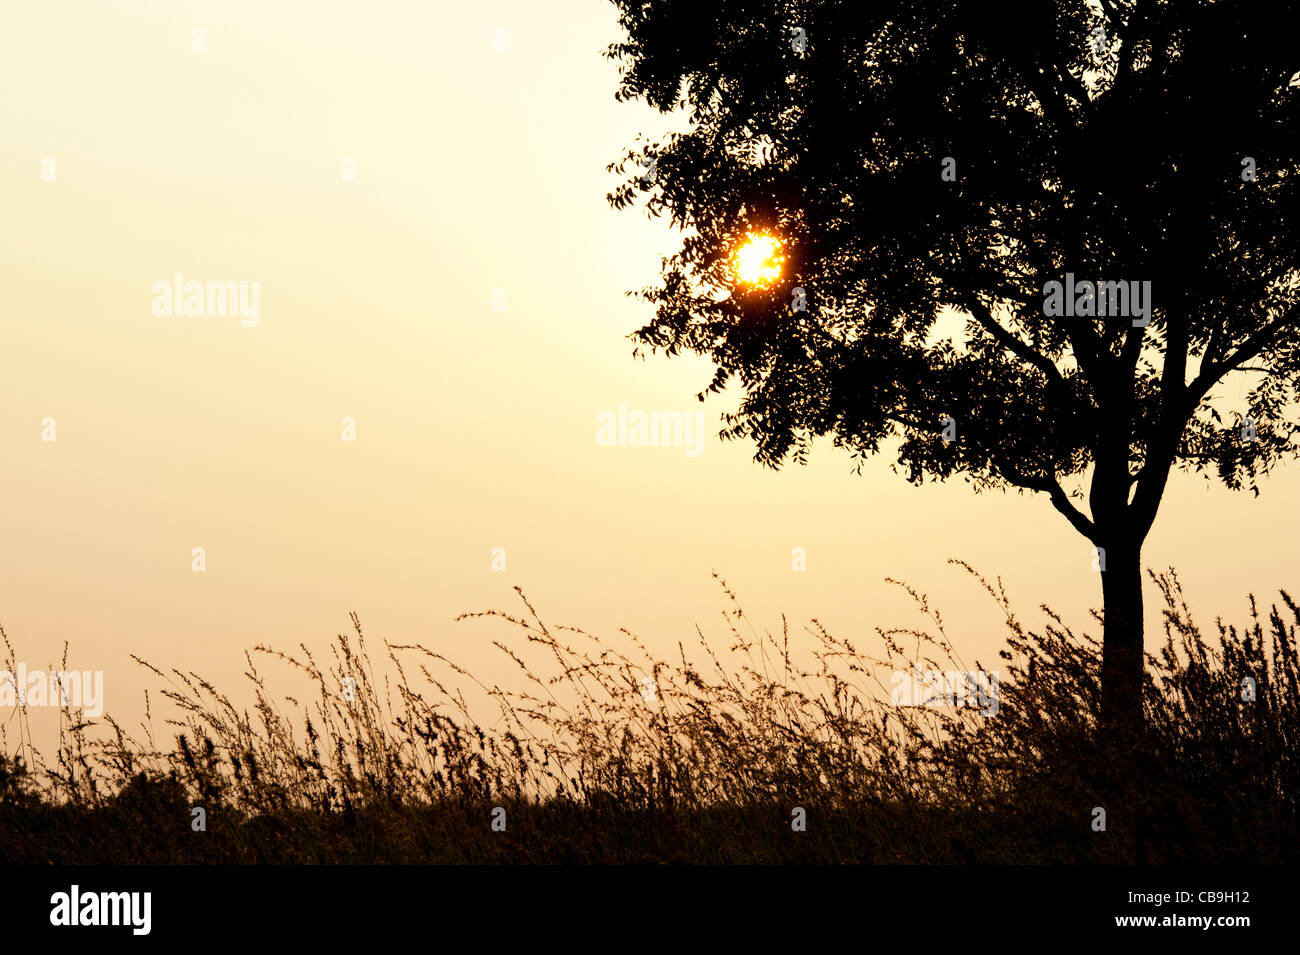 Indian tree and grasses in the countryside at sunset. Andhra Pradesh, India. Silhouette Stock Photo